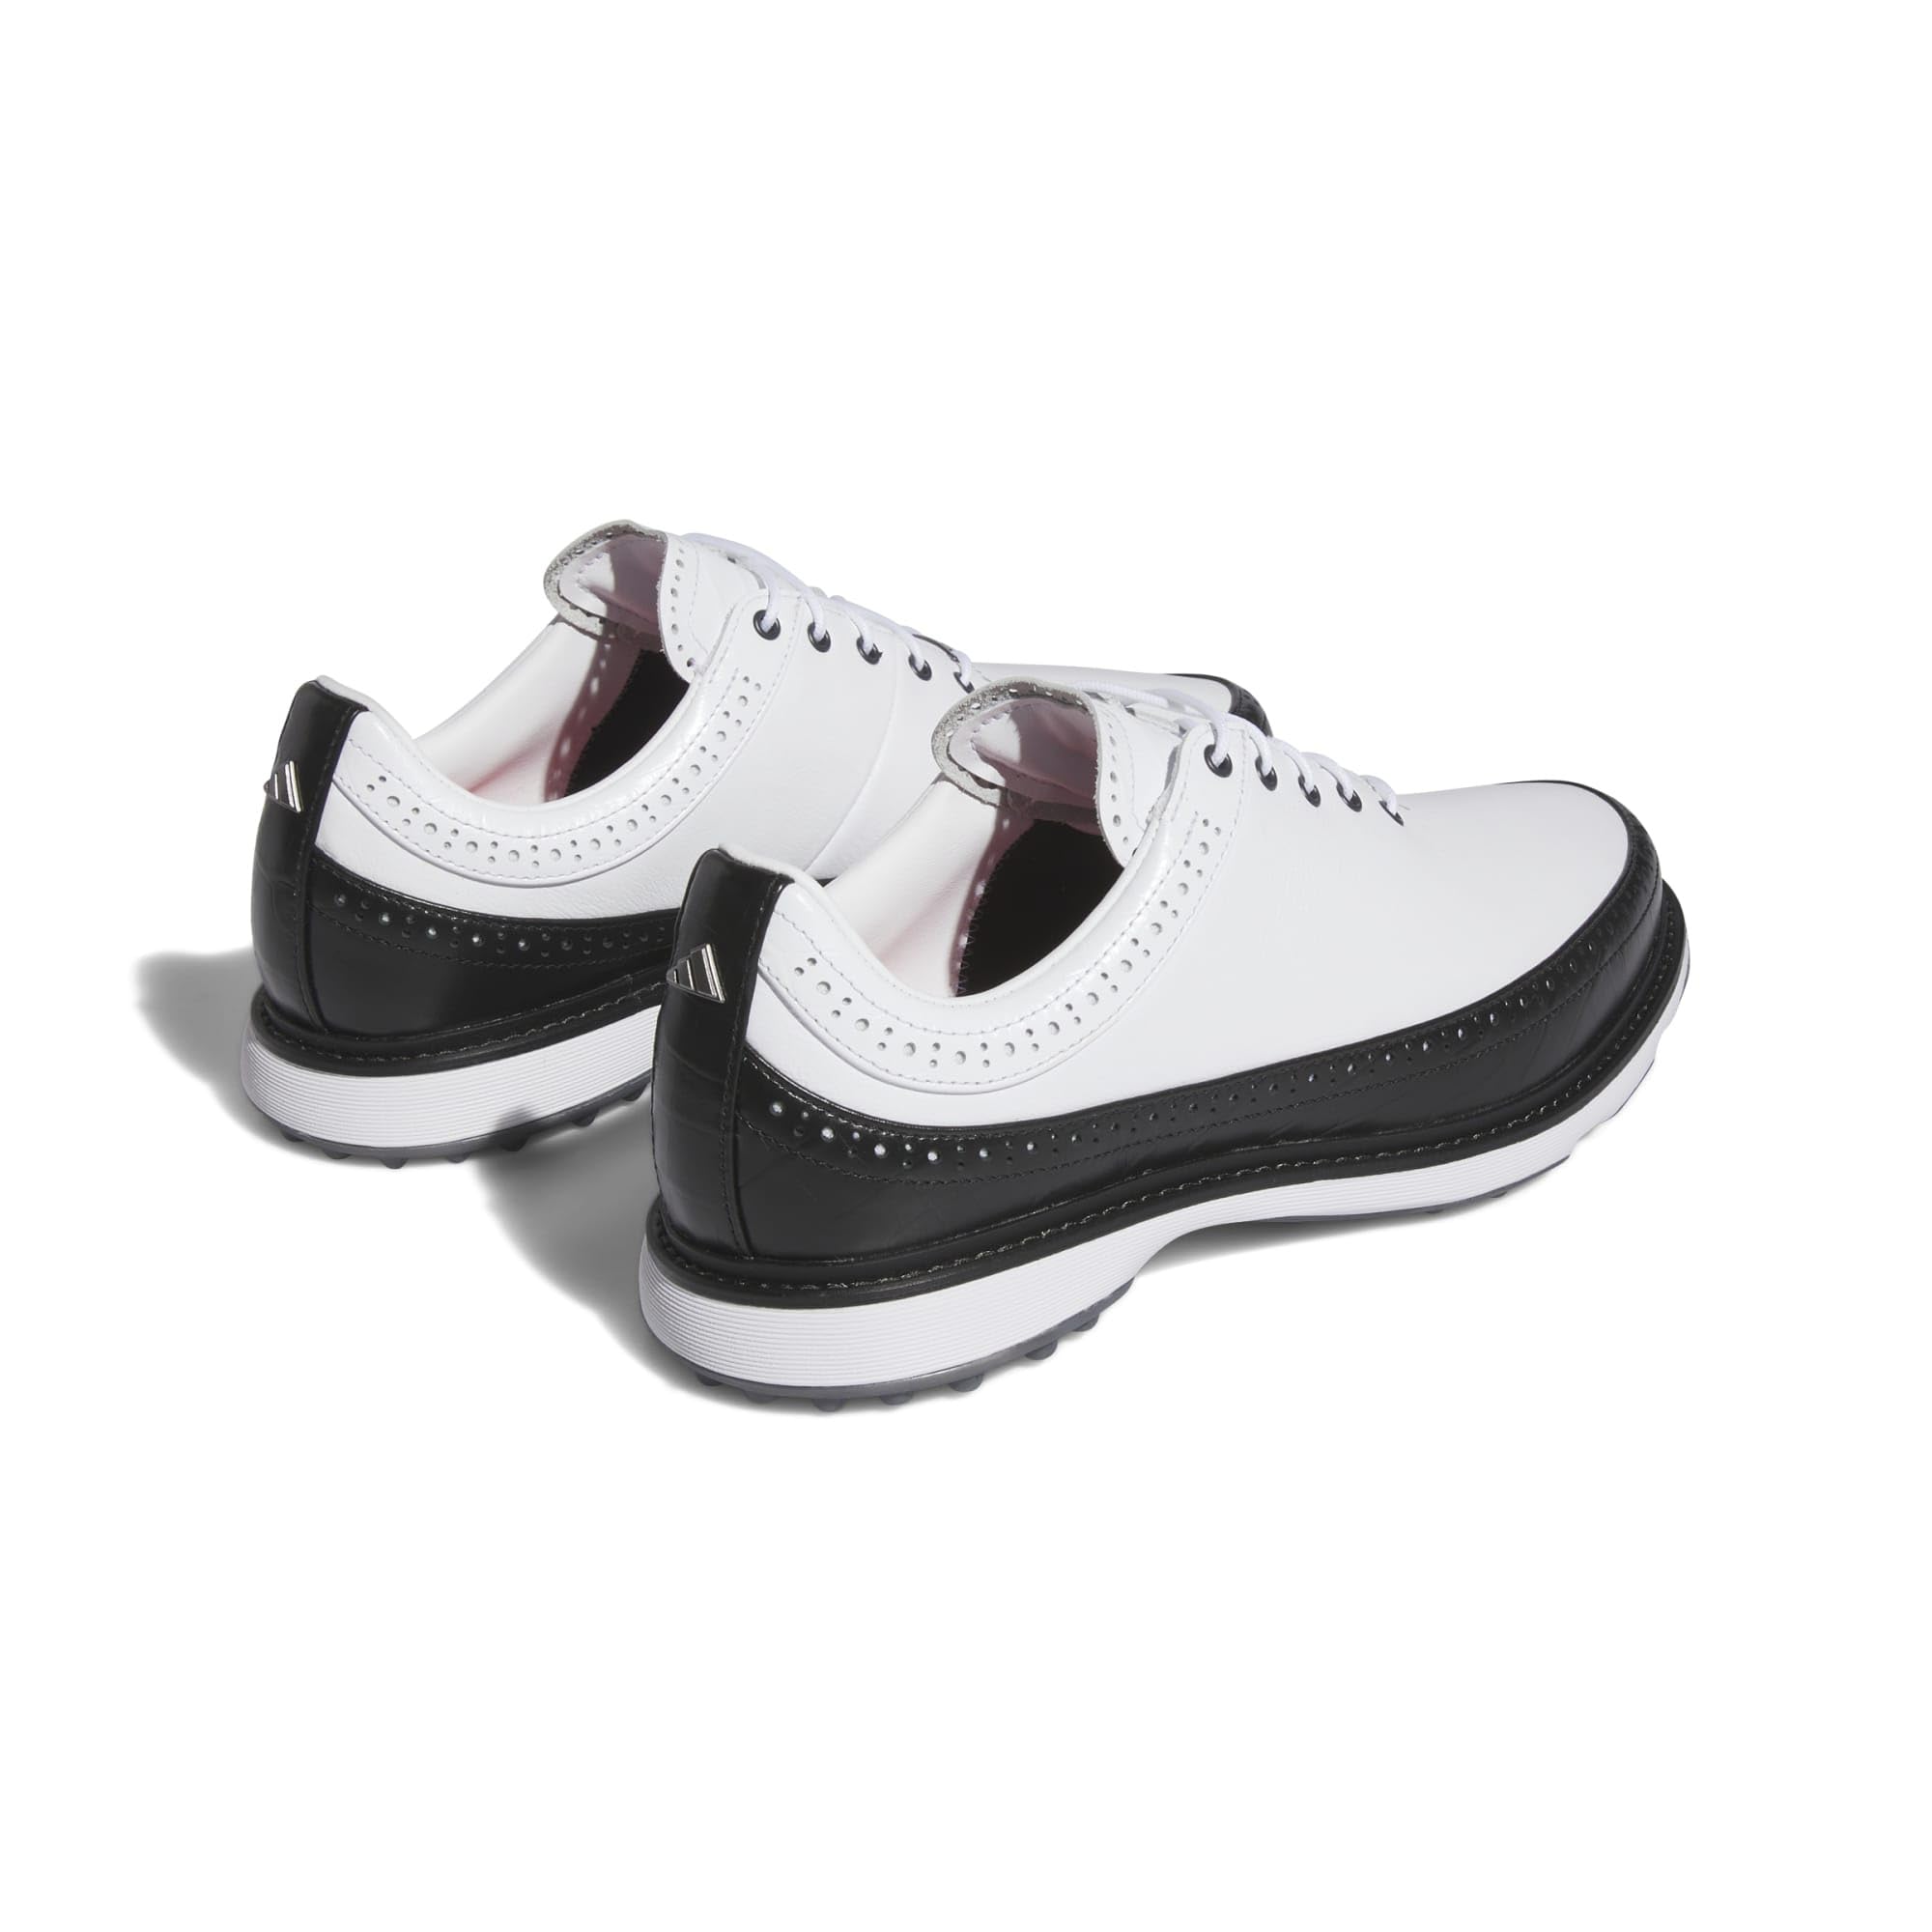 Кроссовки adidas Golf MC80 Spikeless Golf Shoe size 40 45 men spikeless golf shoes white waterproof antisideslip with removable shoe pin breathable golf training mens trainers